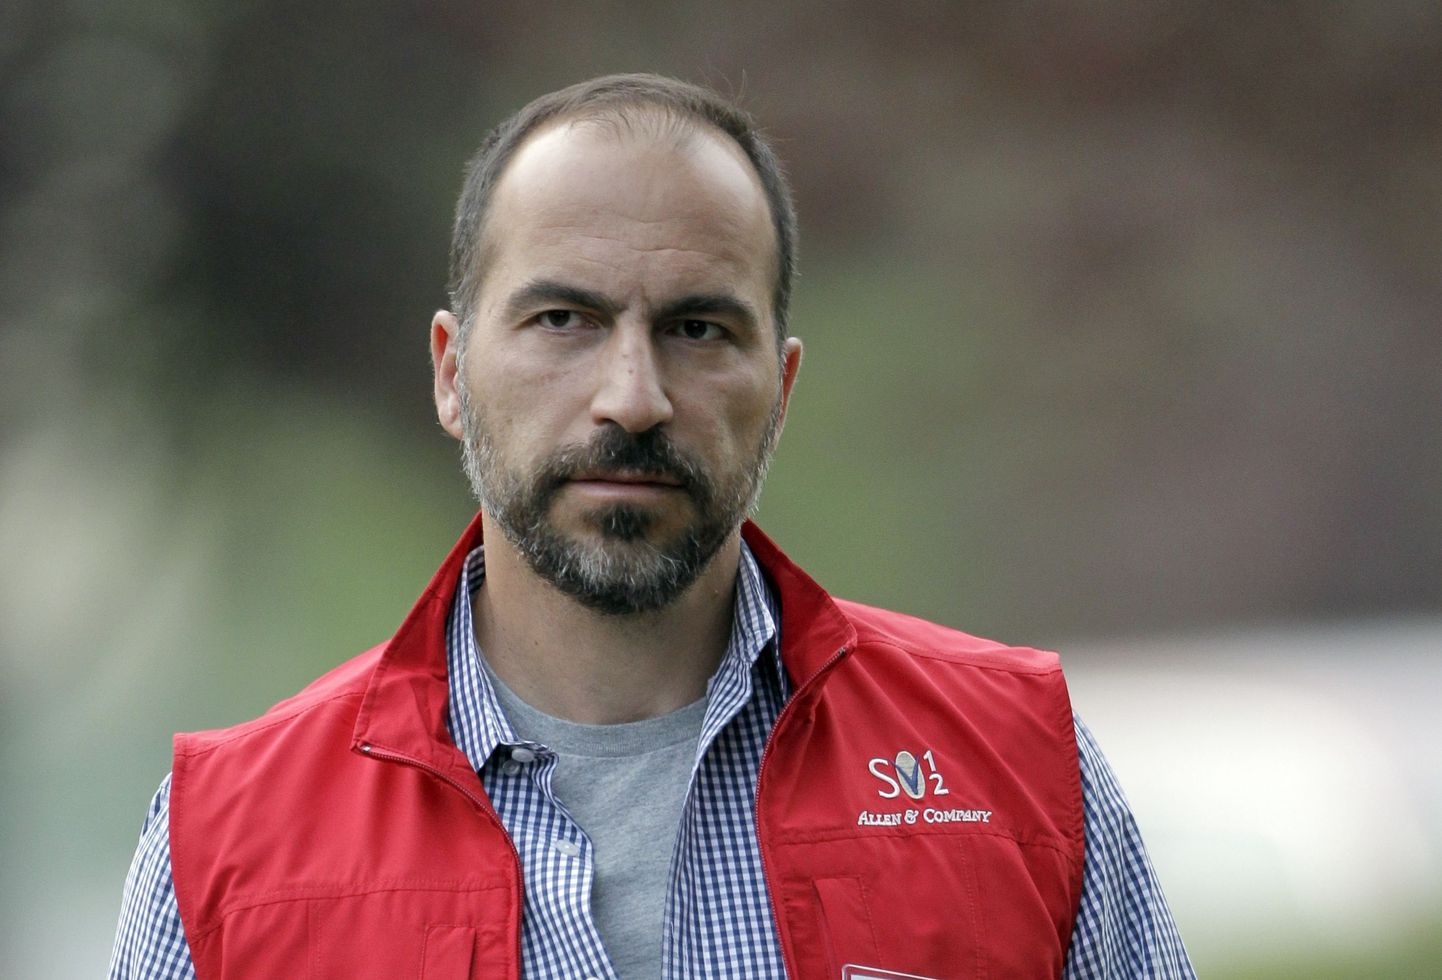 FILE- In this July 13, 2012, file photo, Dara Khosrowshahi the CEO of Expedia, Inc., attends the Allen & Company Sun Valley Conference in Sun Valley, Idaho. Two people briefed on the matter said Sunday, Aug. 27, 2017, that Khosrowshahi has been named CEO of ride-hailing giant Uber Technologies Inc. (AP Photo/Paul Sakuma, File)